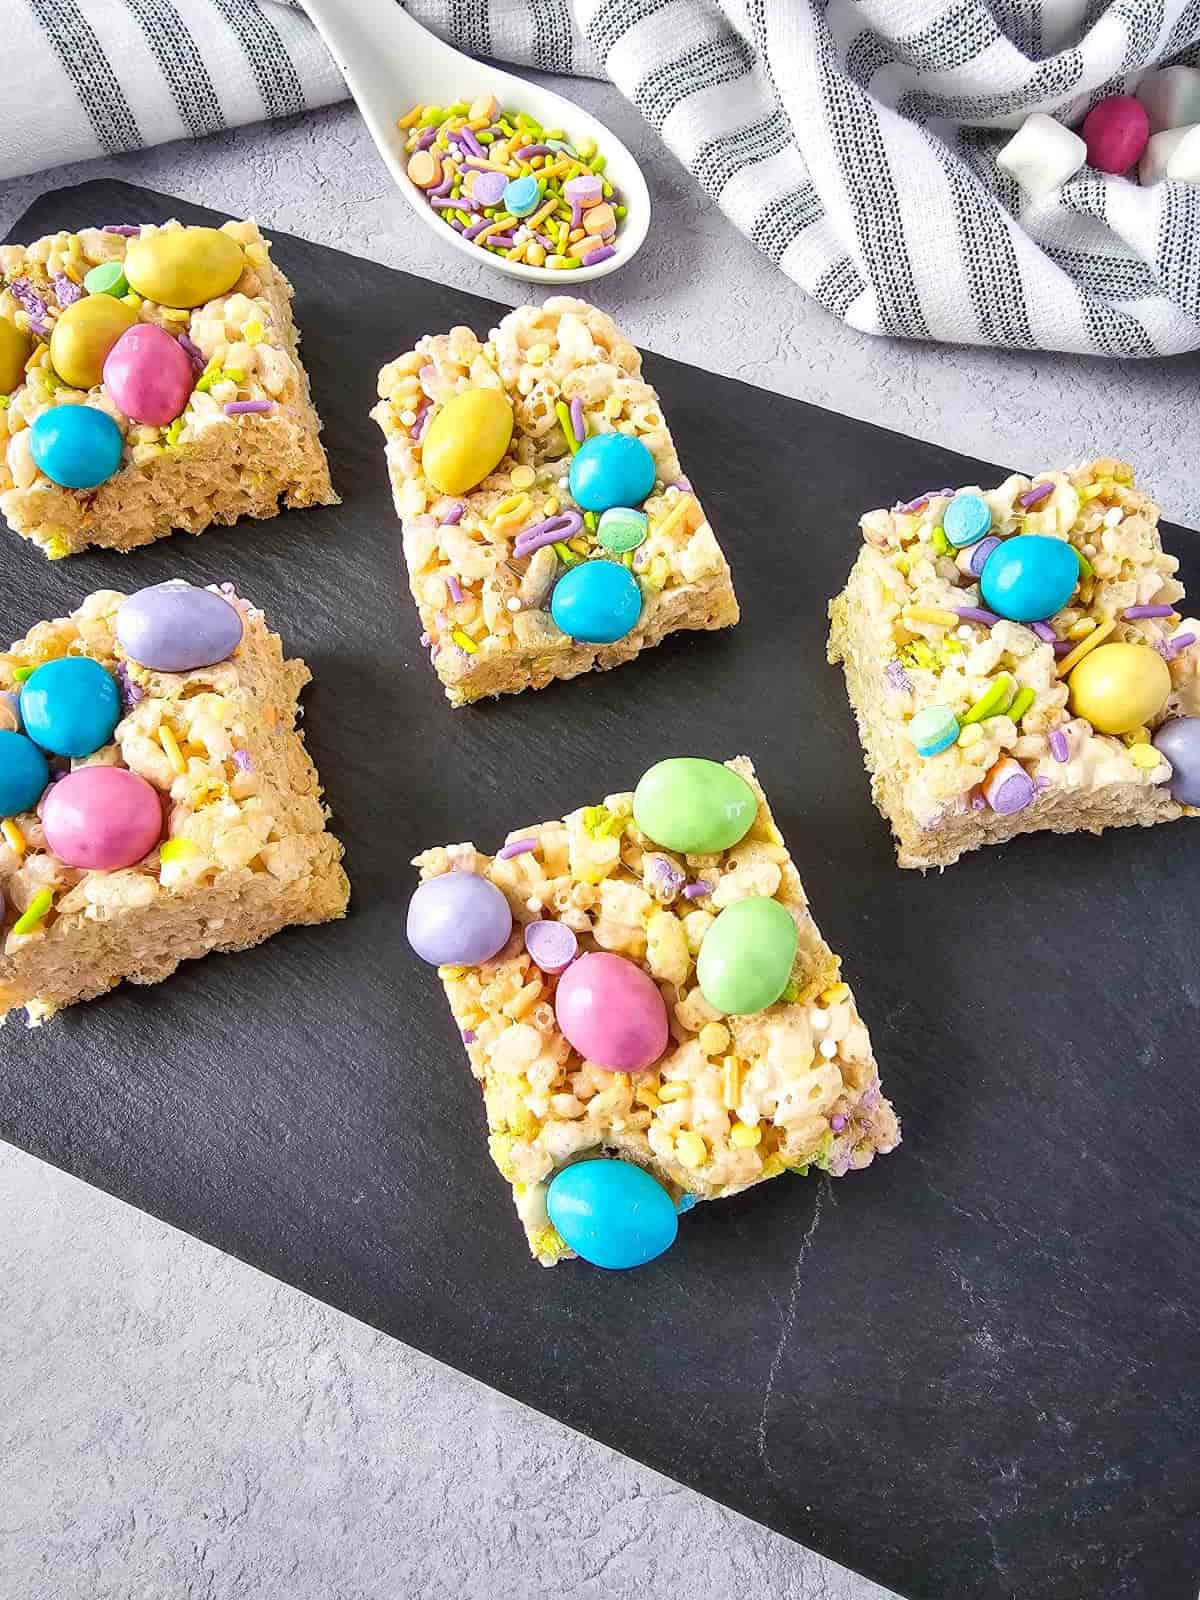 M&M rice krispie treats topped with colorful peanut M&Ms and sprinkles on a serving board.